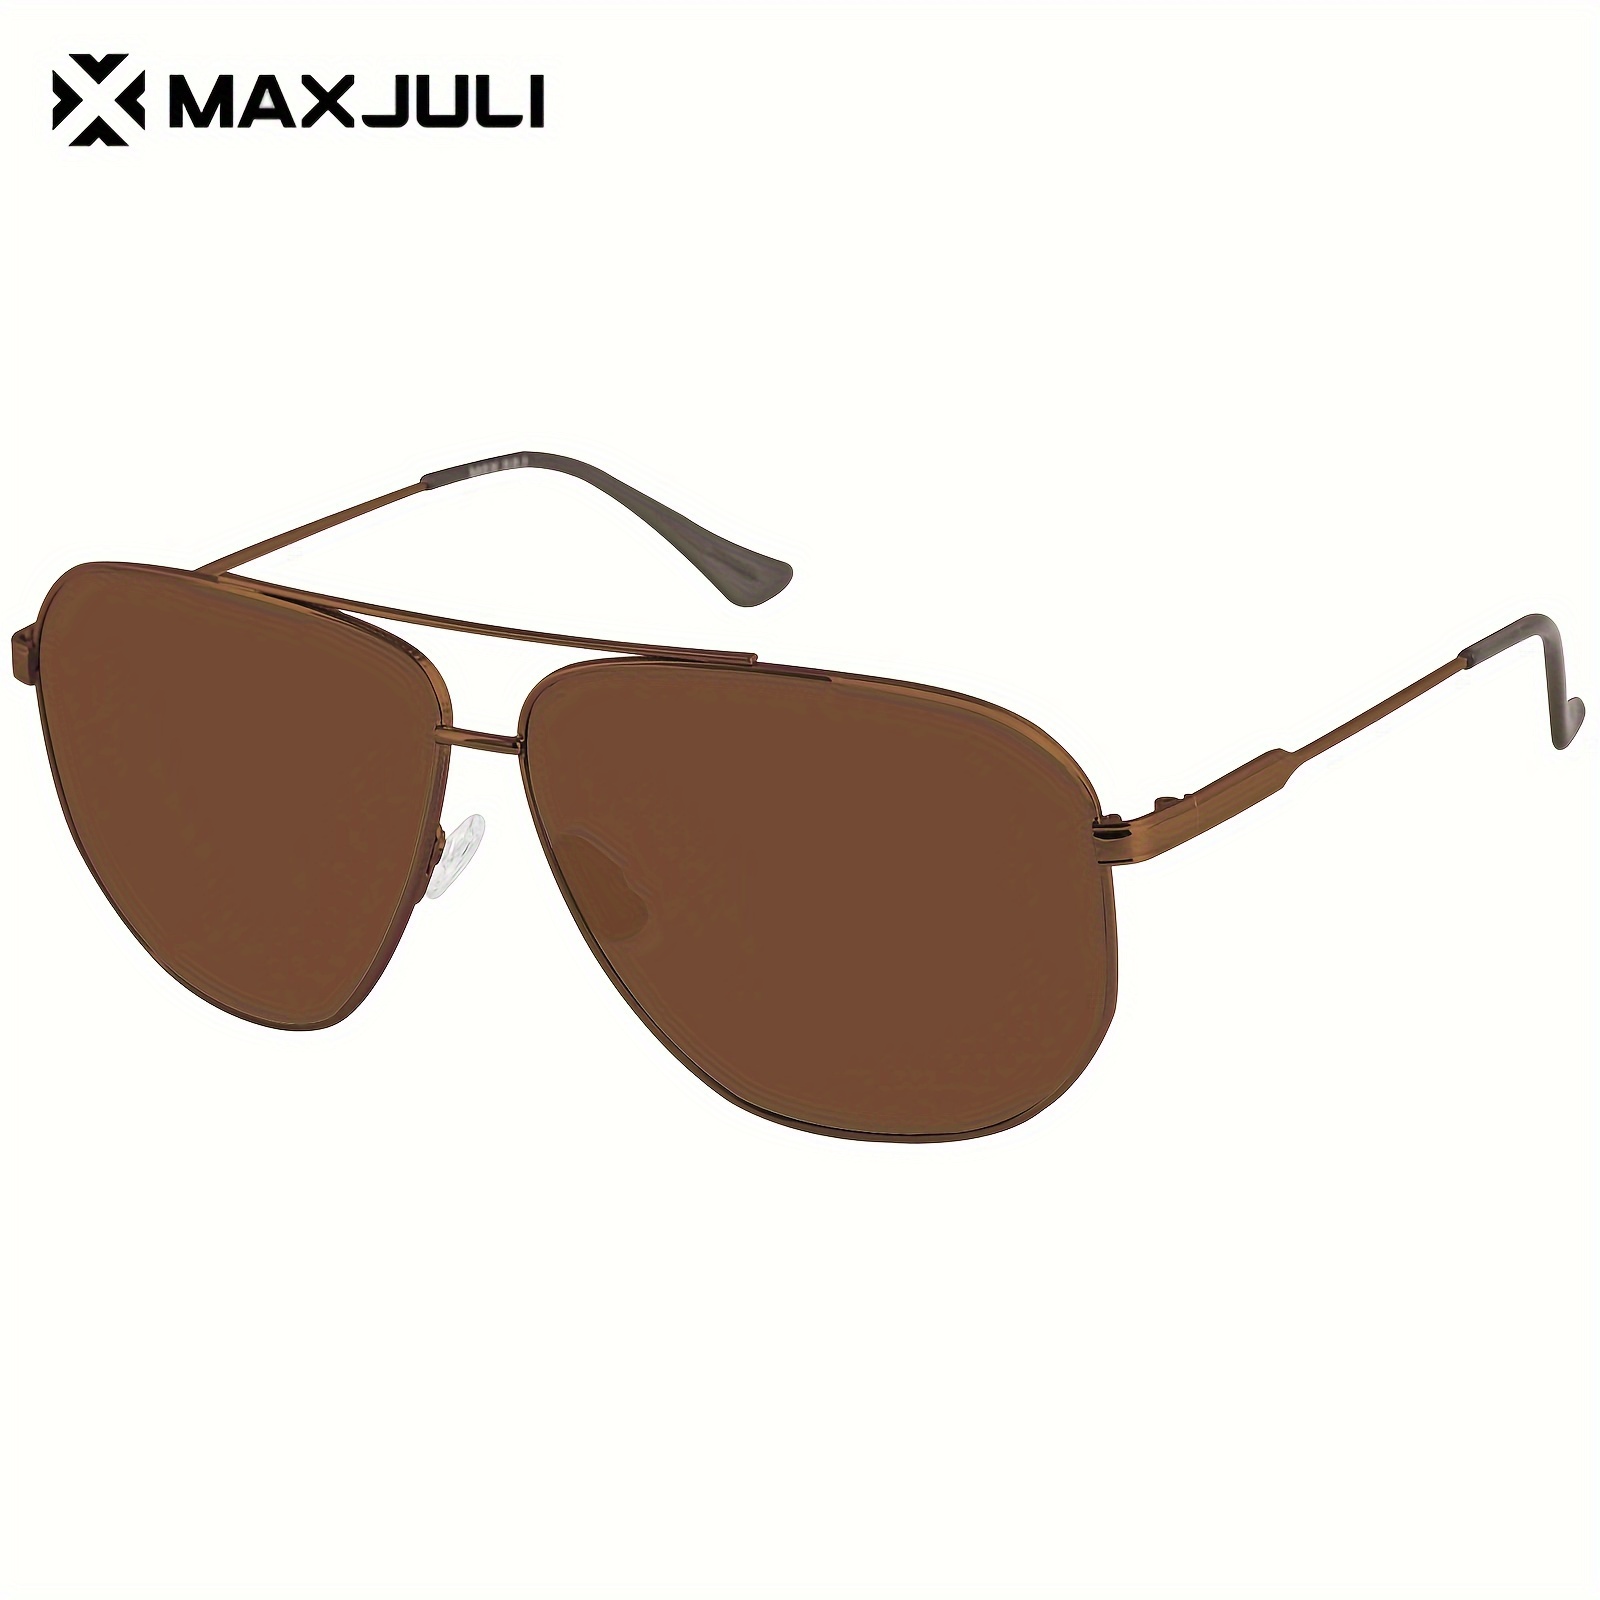 MAXJULI XL Size Extra Large Polarized Sunglasses 148 MM for Big Wide Heads  Men Metal Glasses 8816